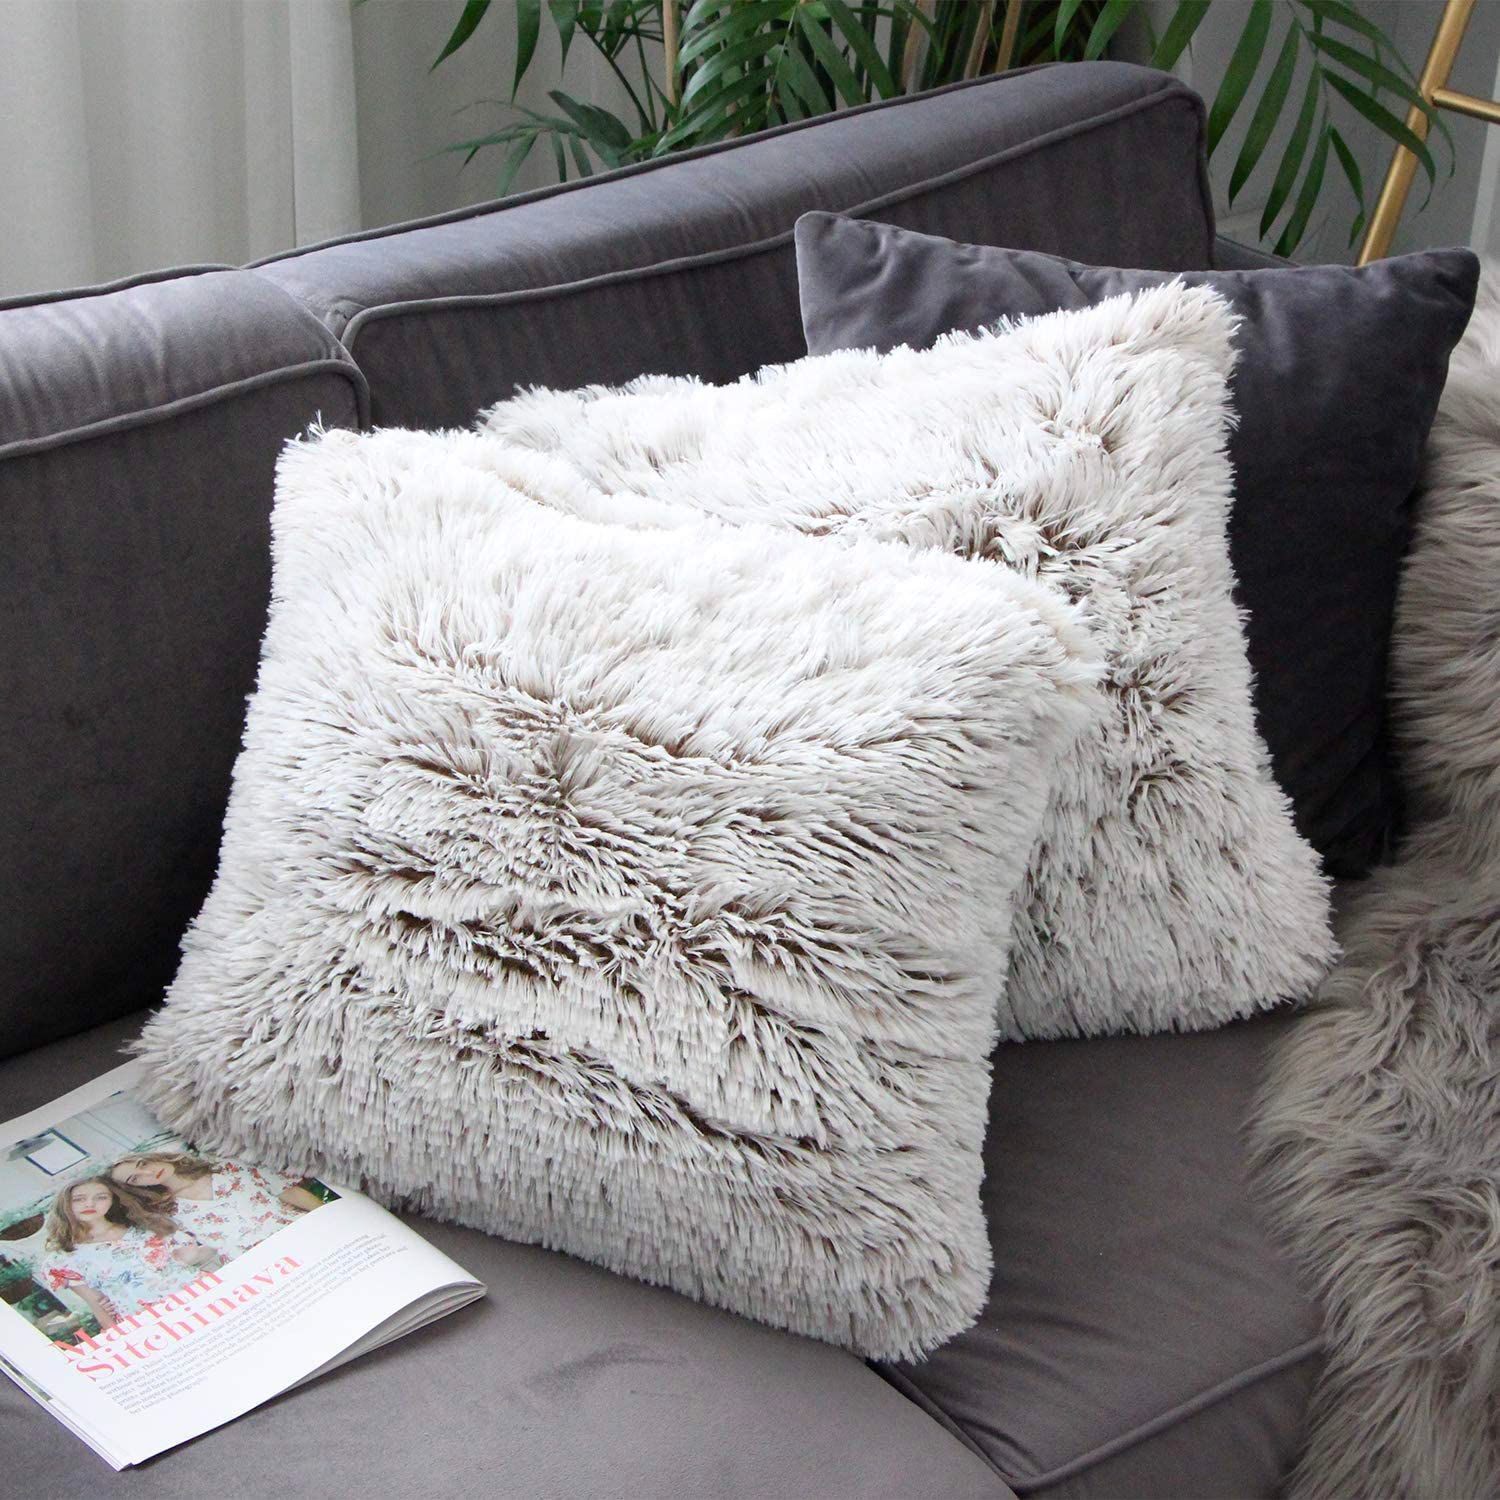 The Best Winter Decor Option: Uhomy Artificial Fur Throw Pillow Cases